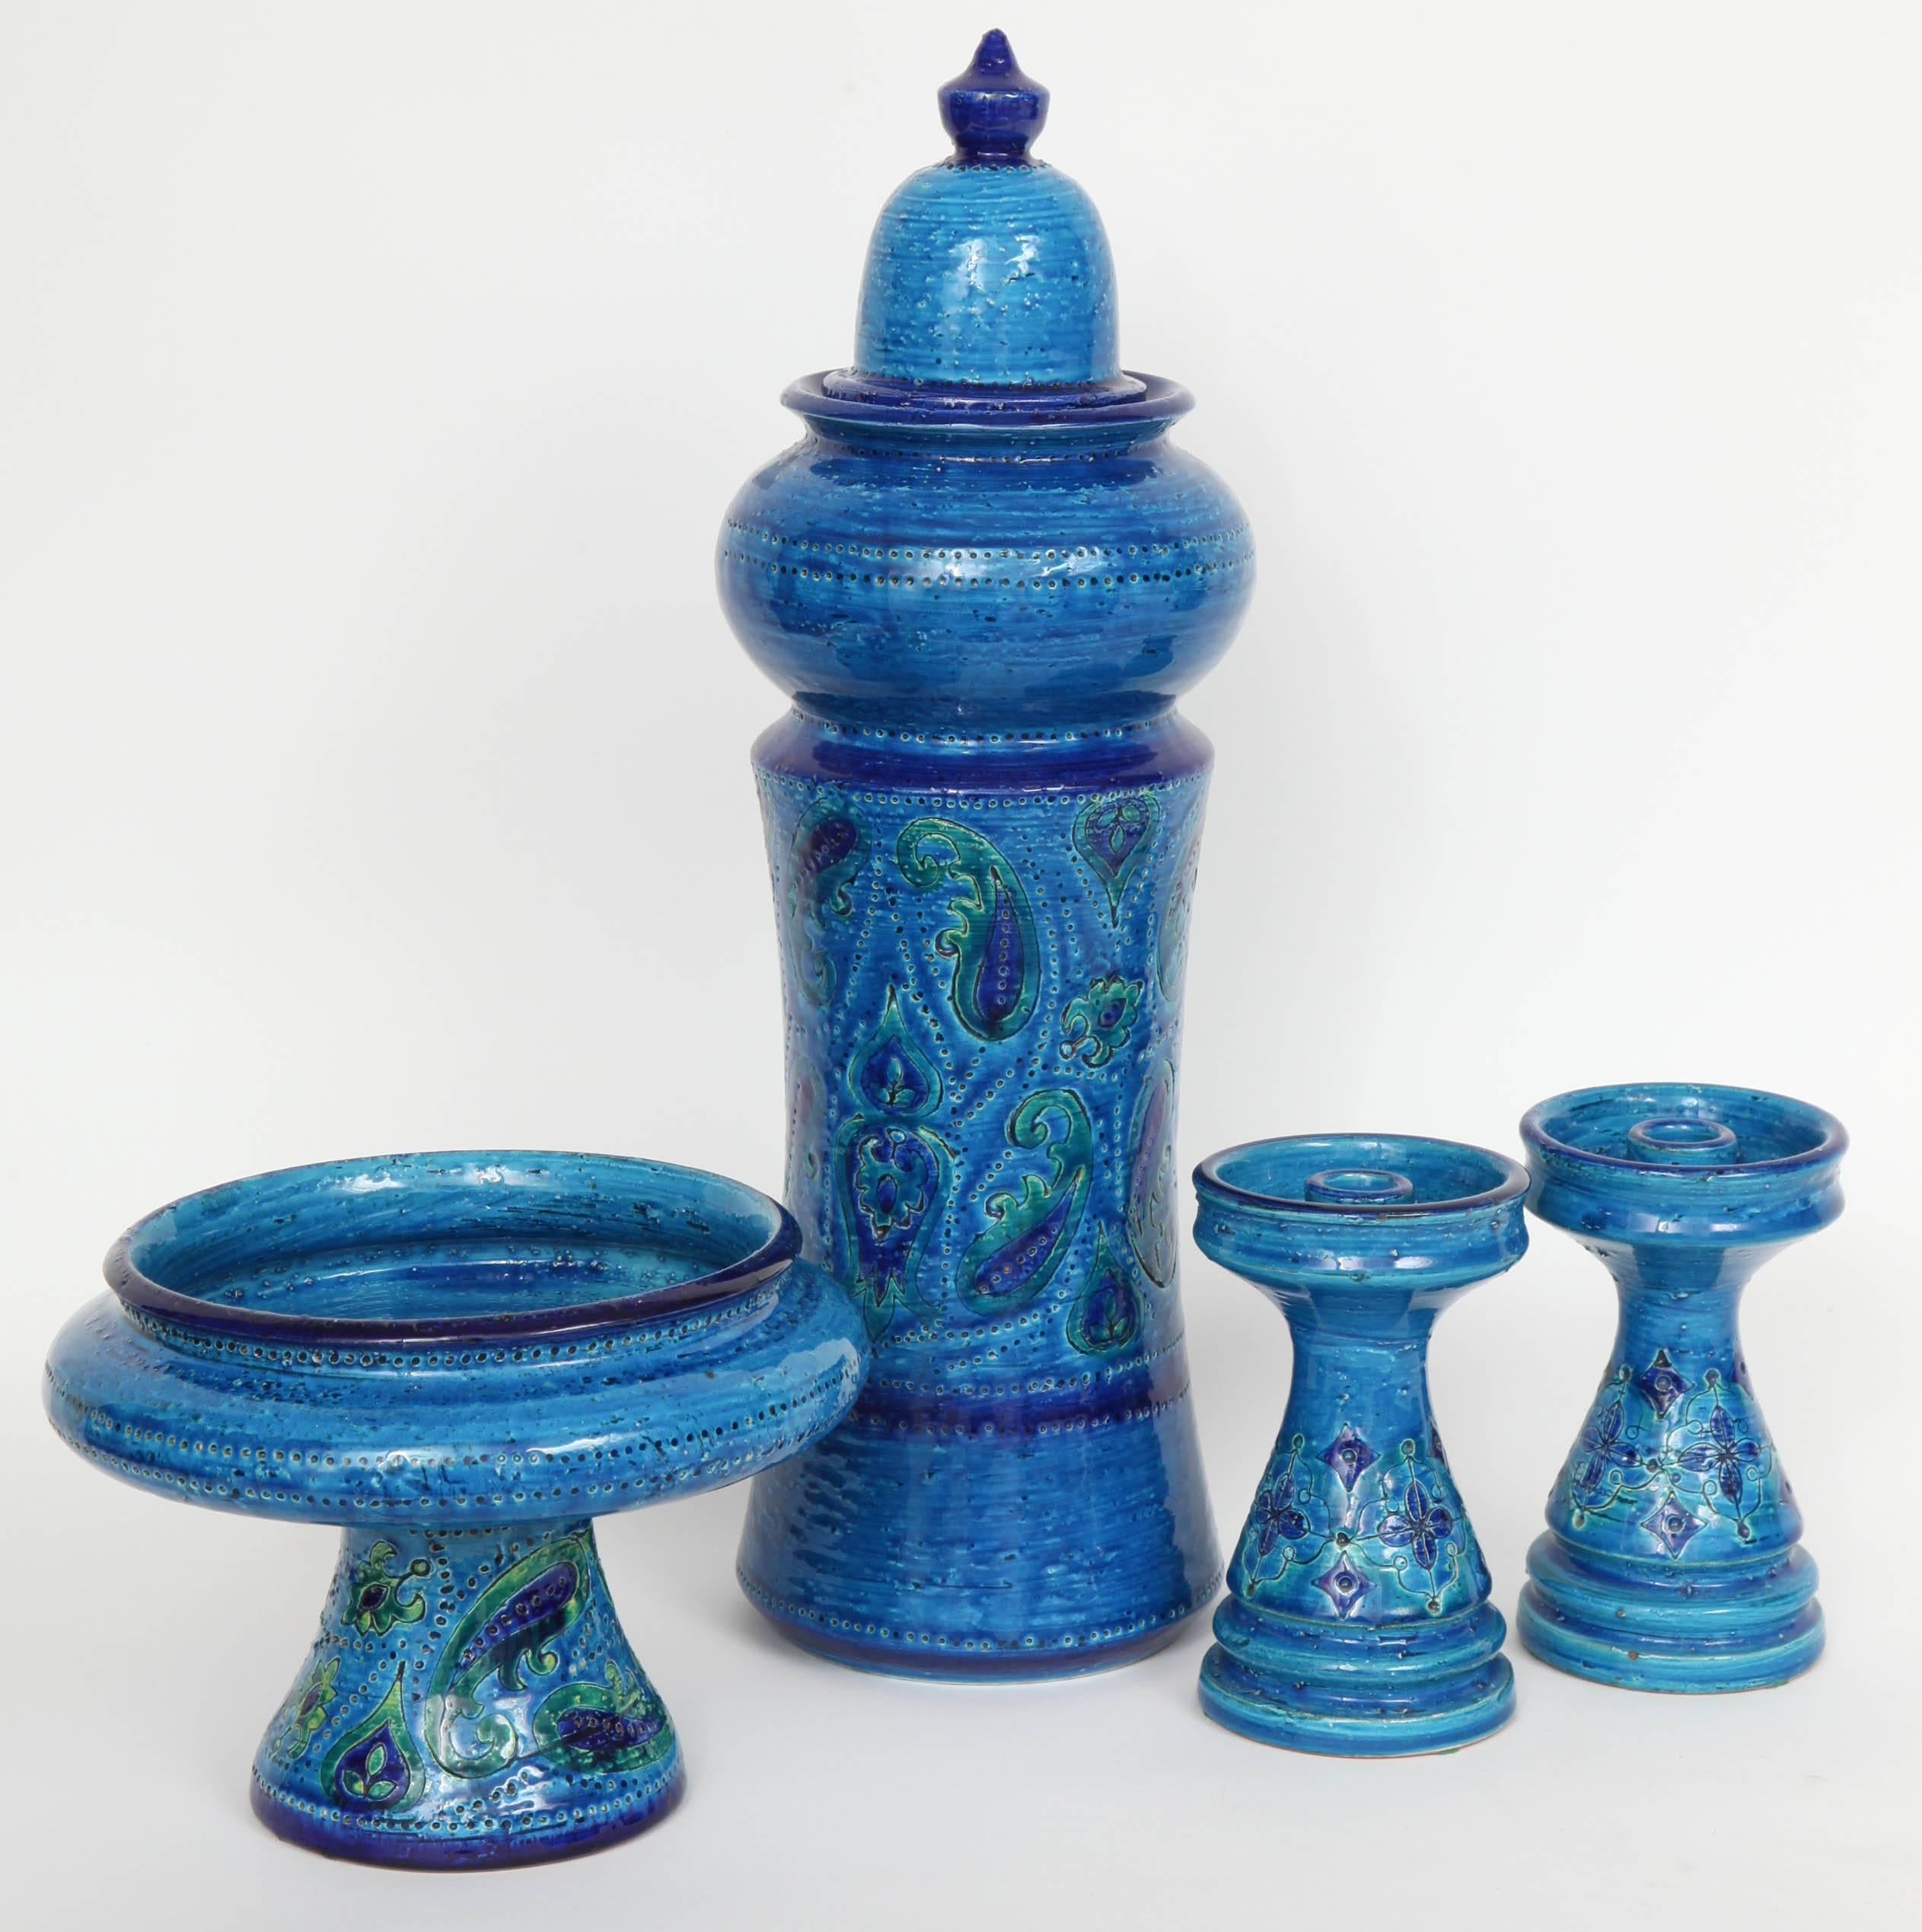 Four-piece Rimini blue glazed ceramic set composed of a compote, cannister and a pair of candlesticks. Pieces feature the iconic blue glaze with incised details. Pieces marked Italy on bottom.

Compote measures 9